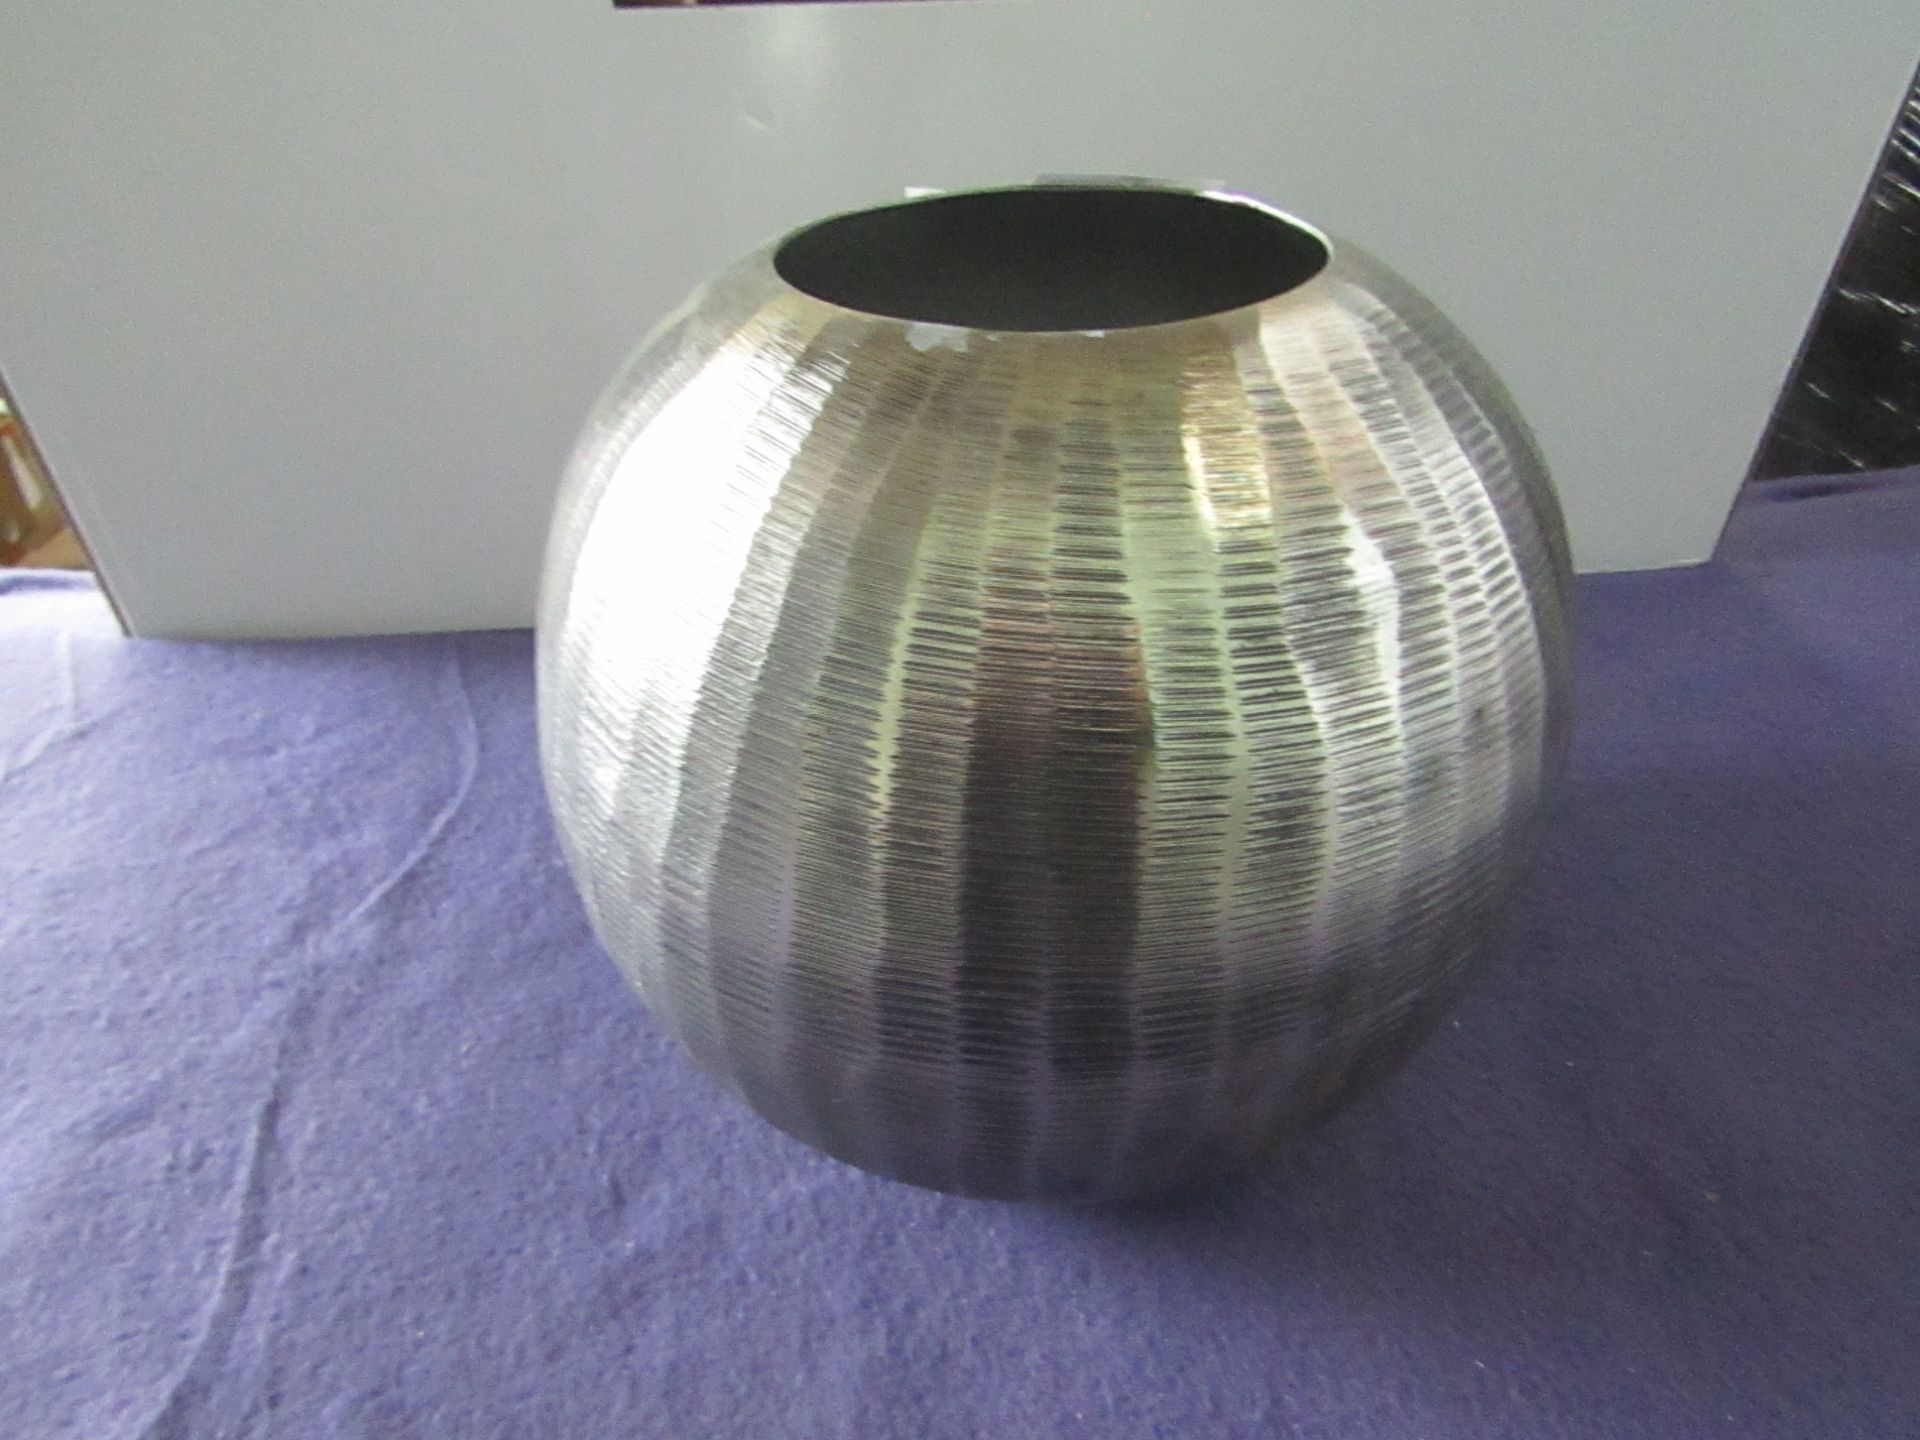 Rowen Group Roscoe Flint Antique Nickel Etched Round Vase RRP Â£54.00 - This item looks to be in